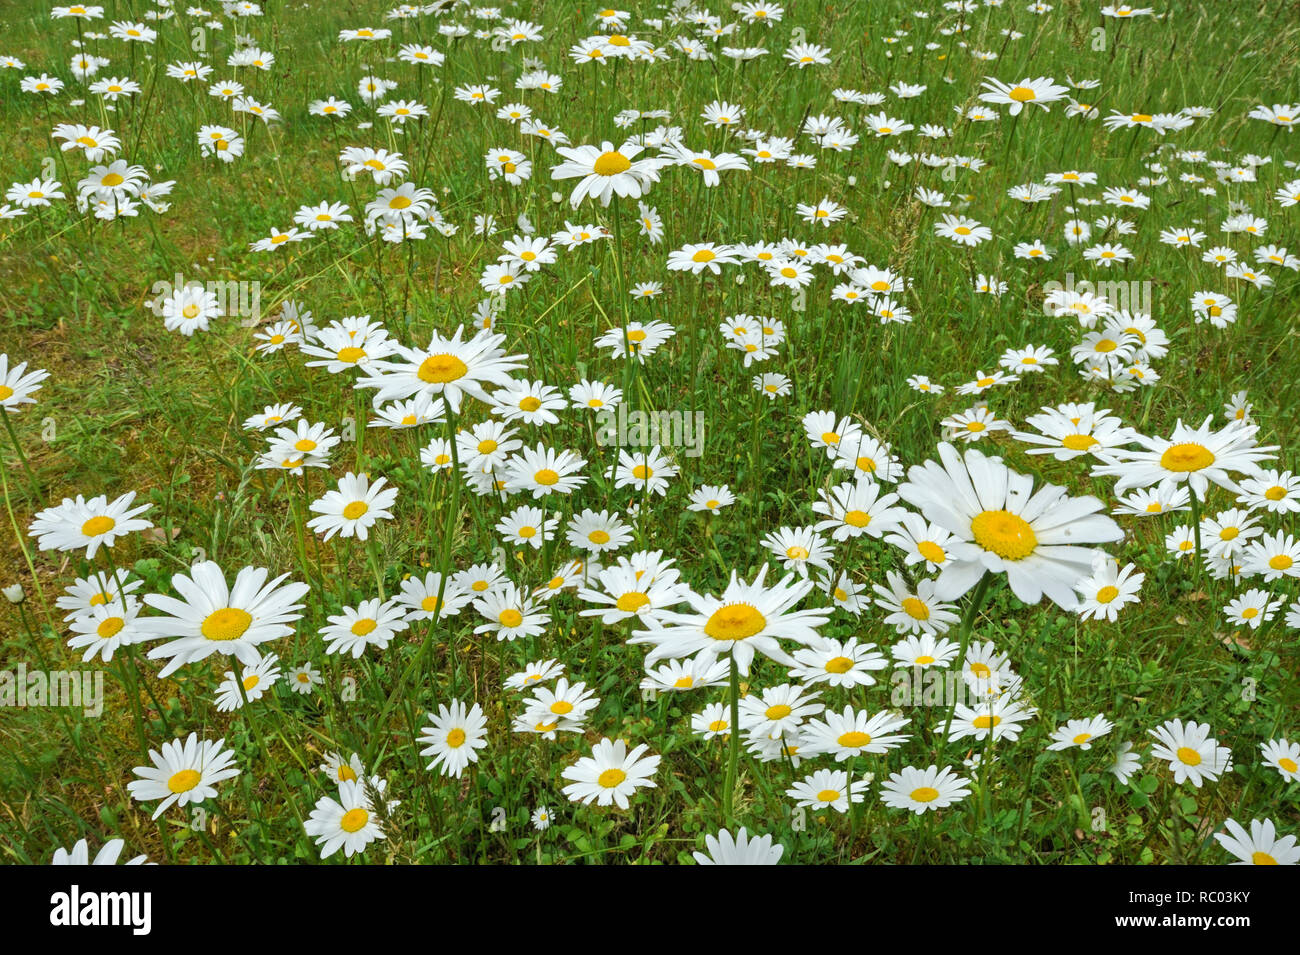 Wiese mit Margeriten | meadow with  oxeye daisy, margherites Stock Photo